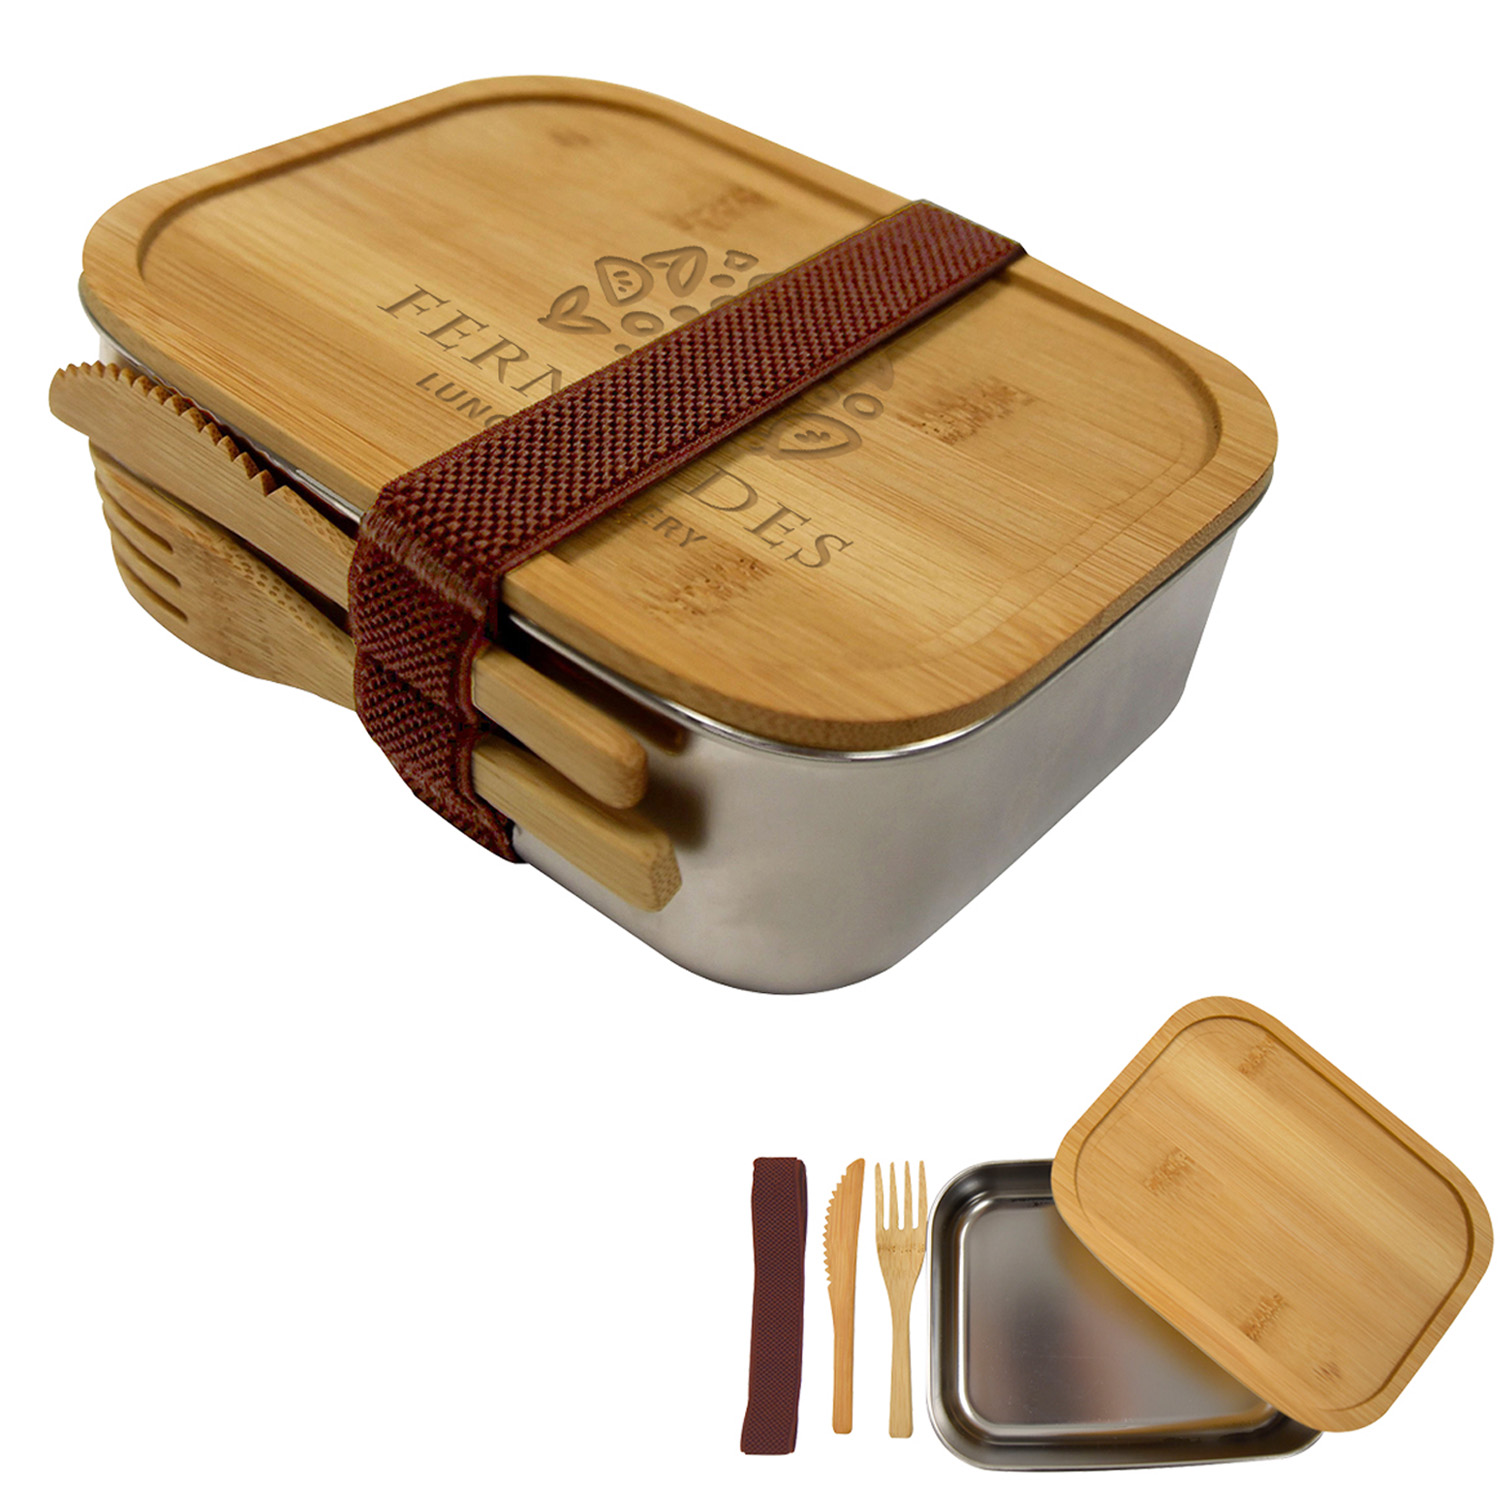 Stainless Steel & Bamboo Bento Box Lunch Set